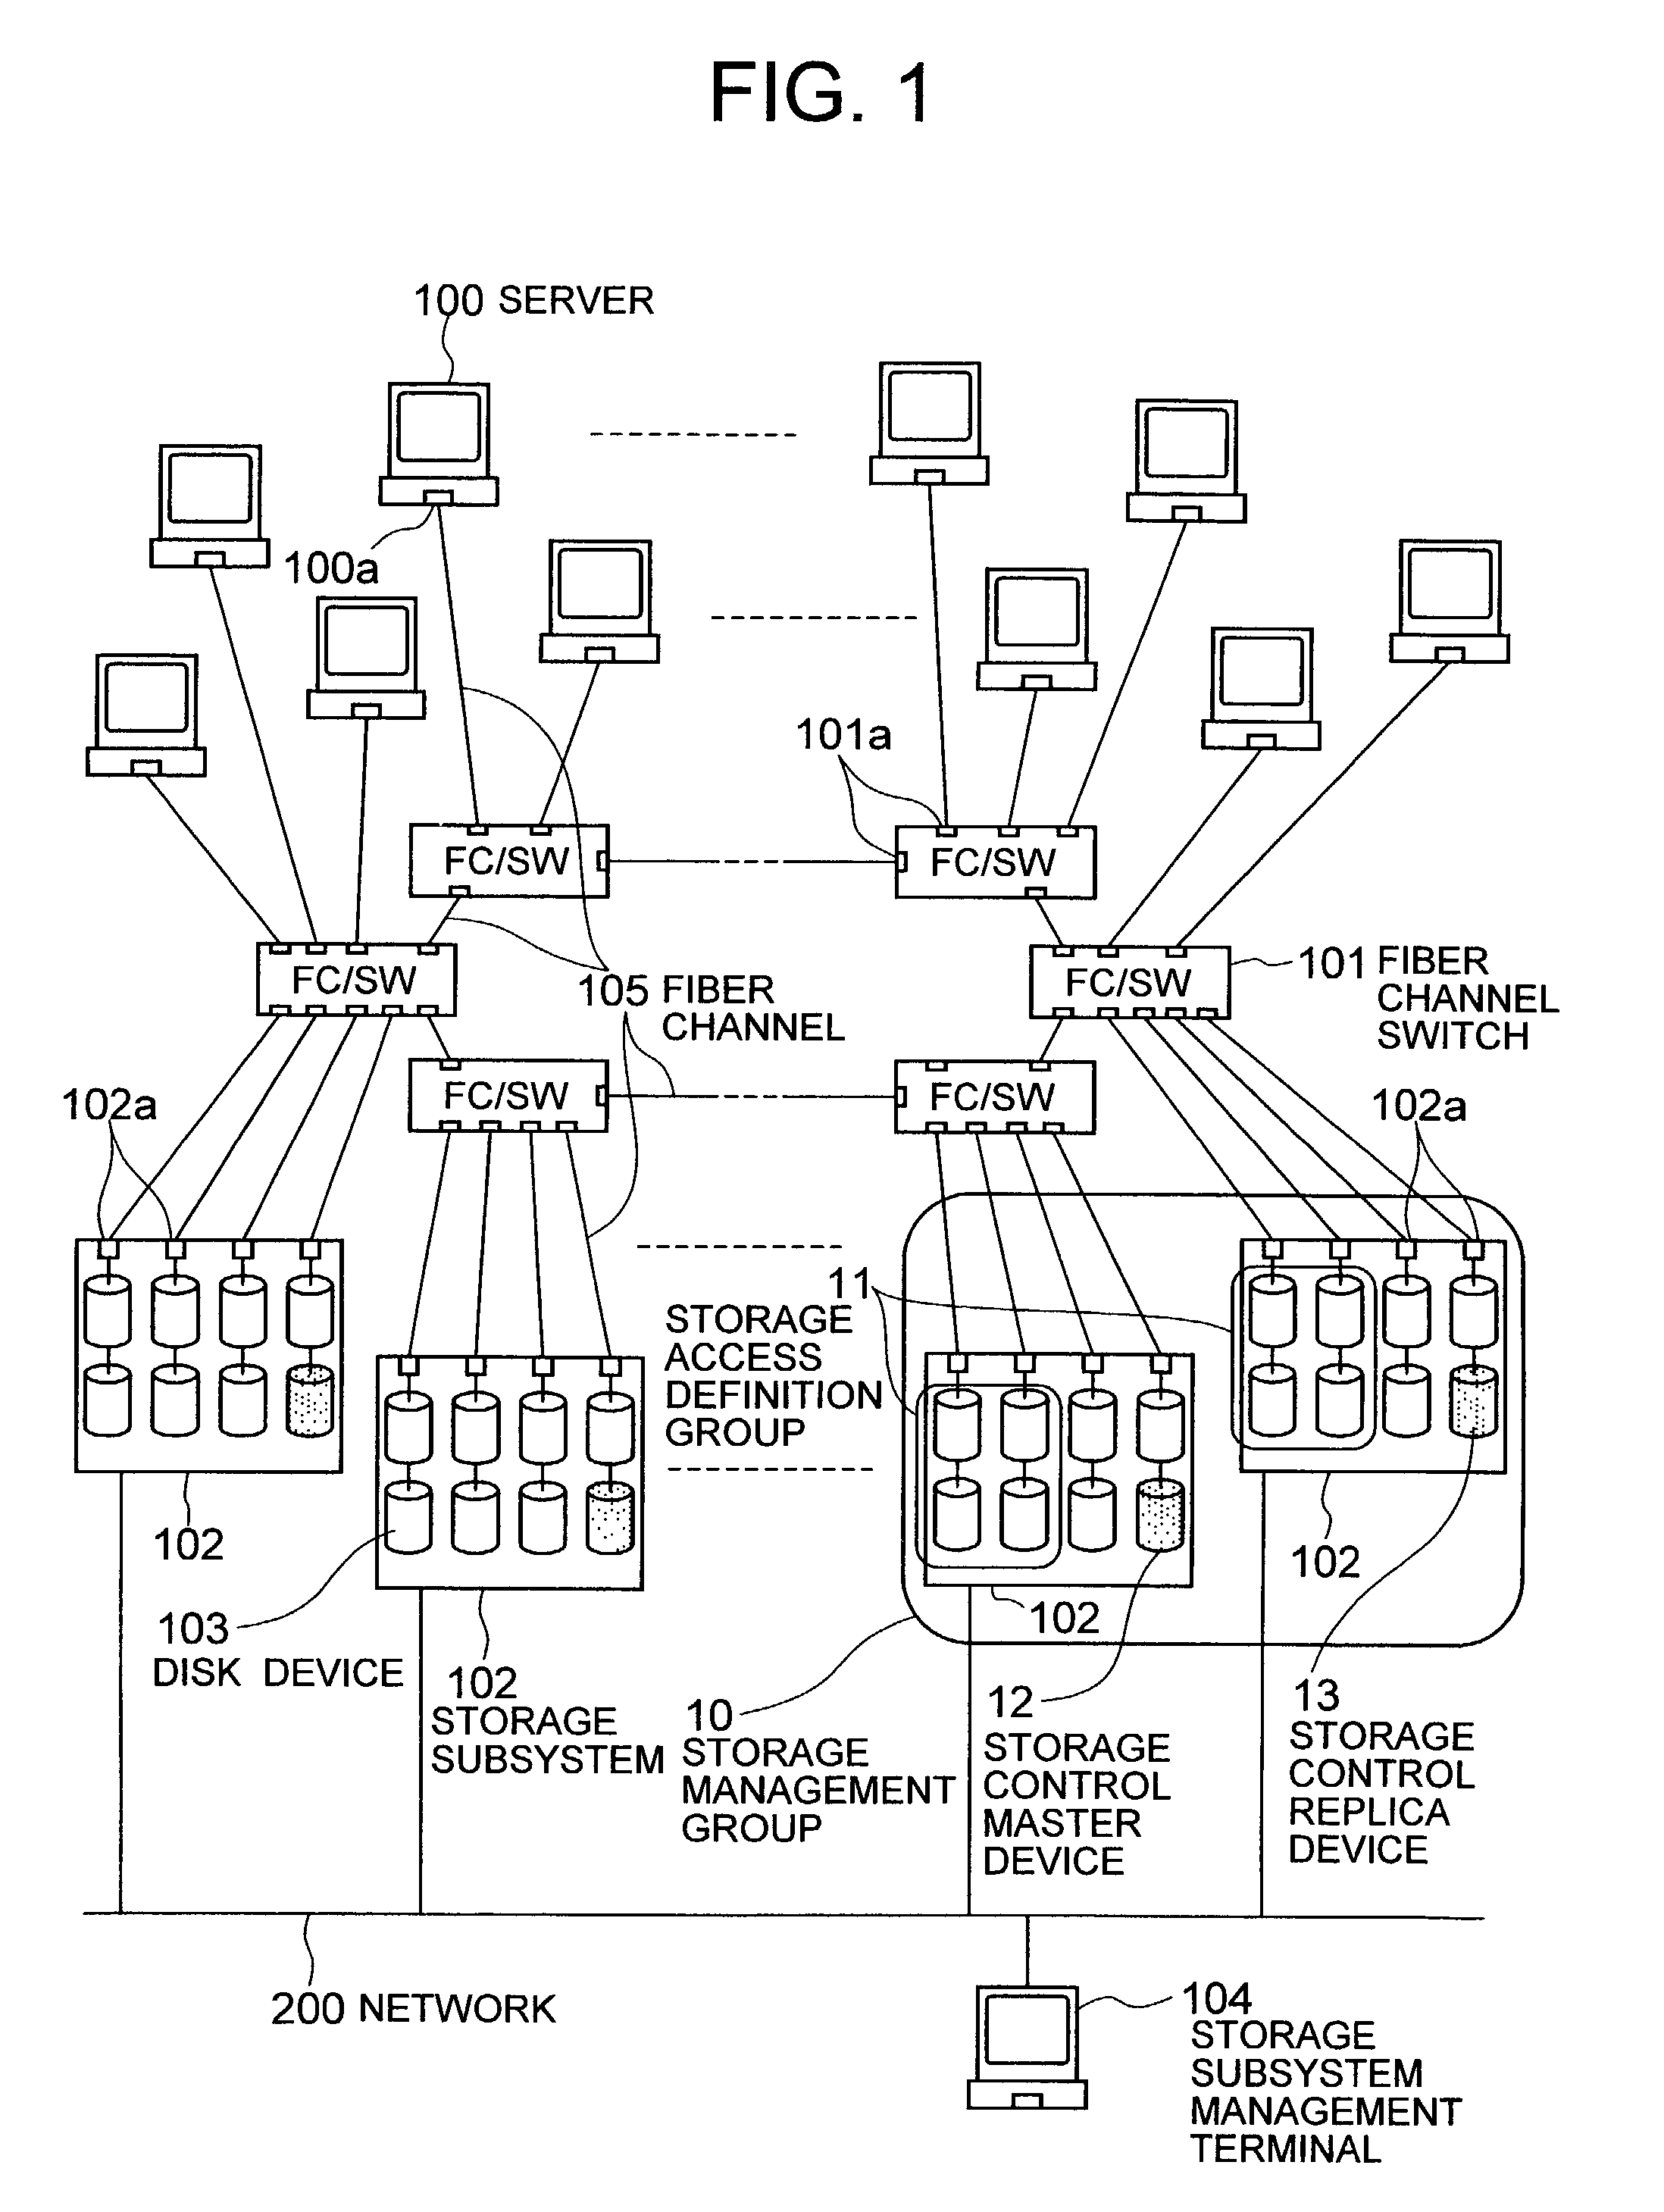 Disk device and disk access route mapping